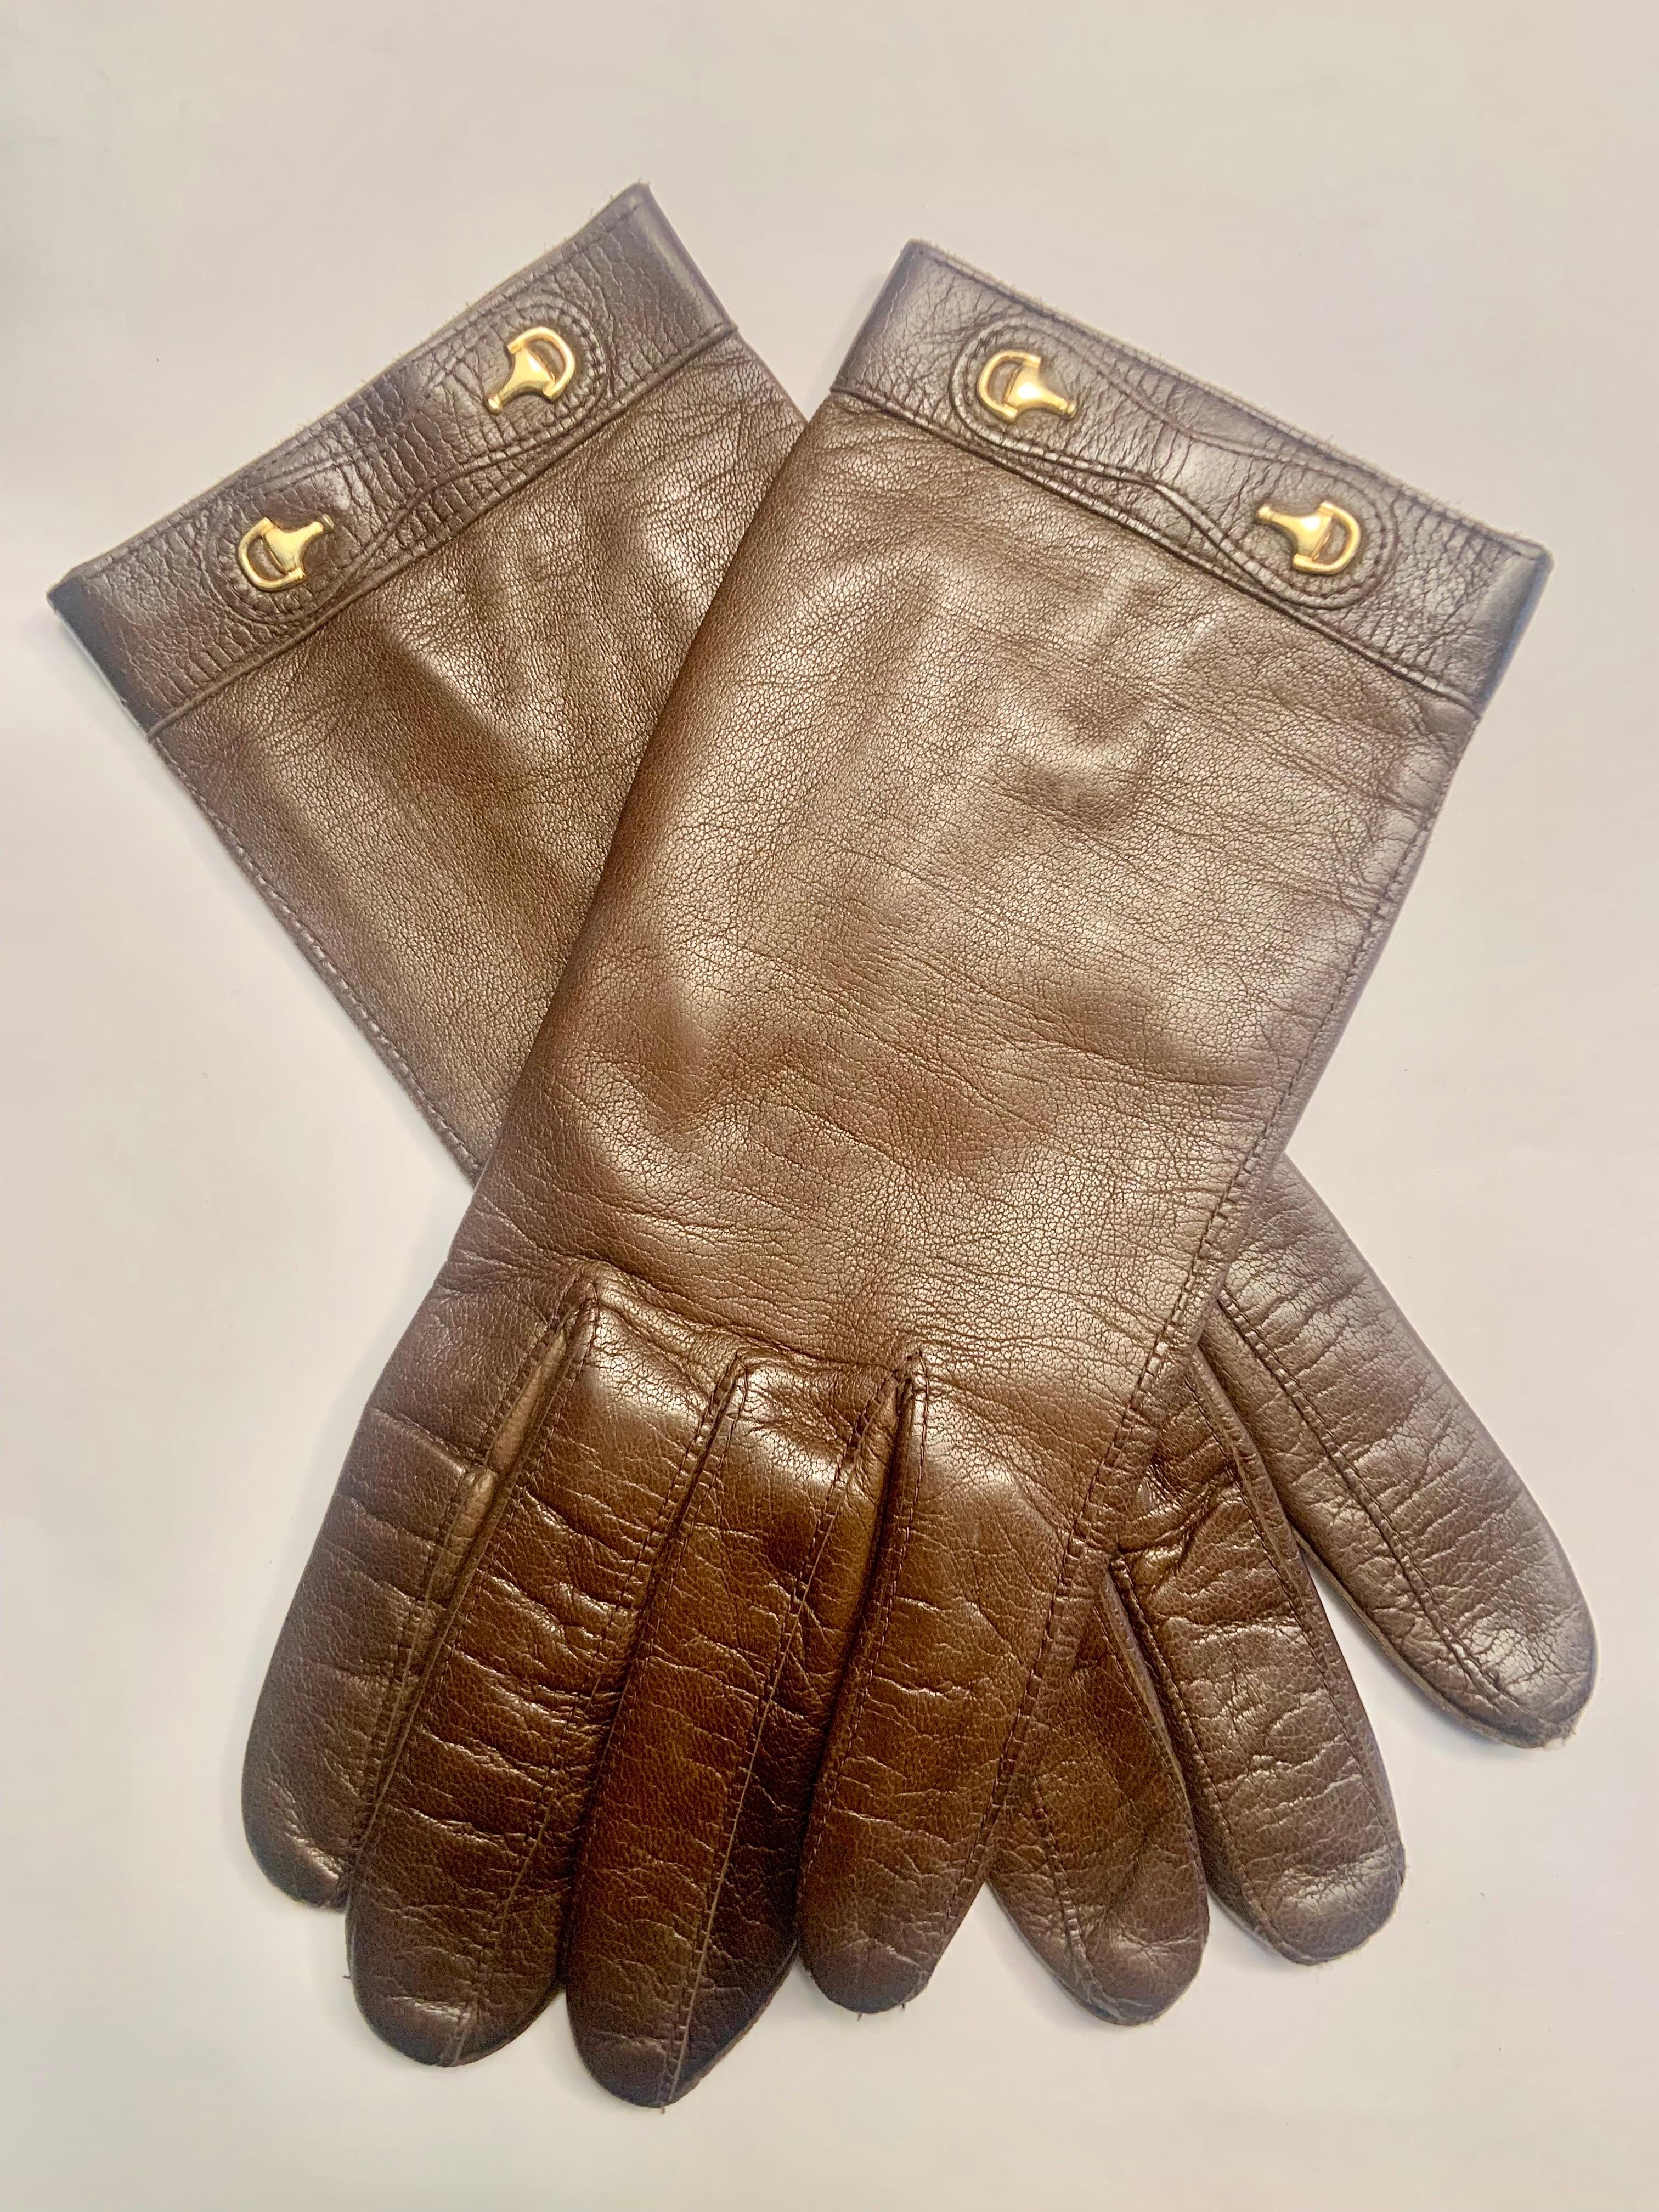 Never worn, these Gucci chocolate brown leather gloves are in excellent condition. They are trimmed at the wrist with a pair of gold toned horse bits, lined in brown silk and marked a size 6 1/2 which is a Small. 
Very often your glove size is the